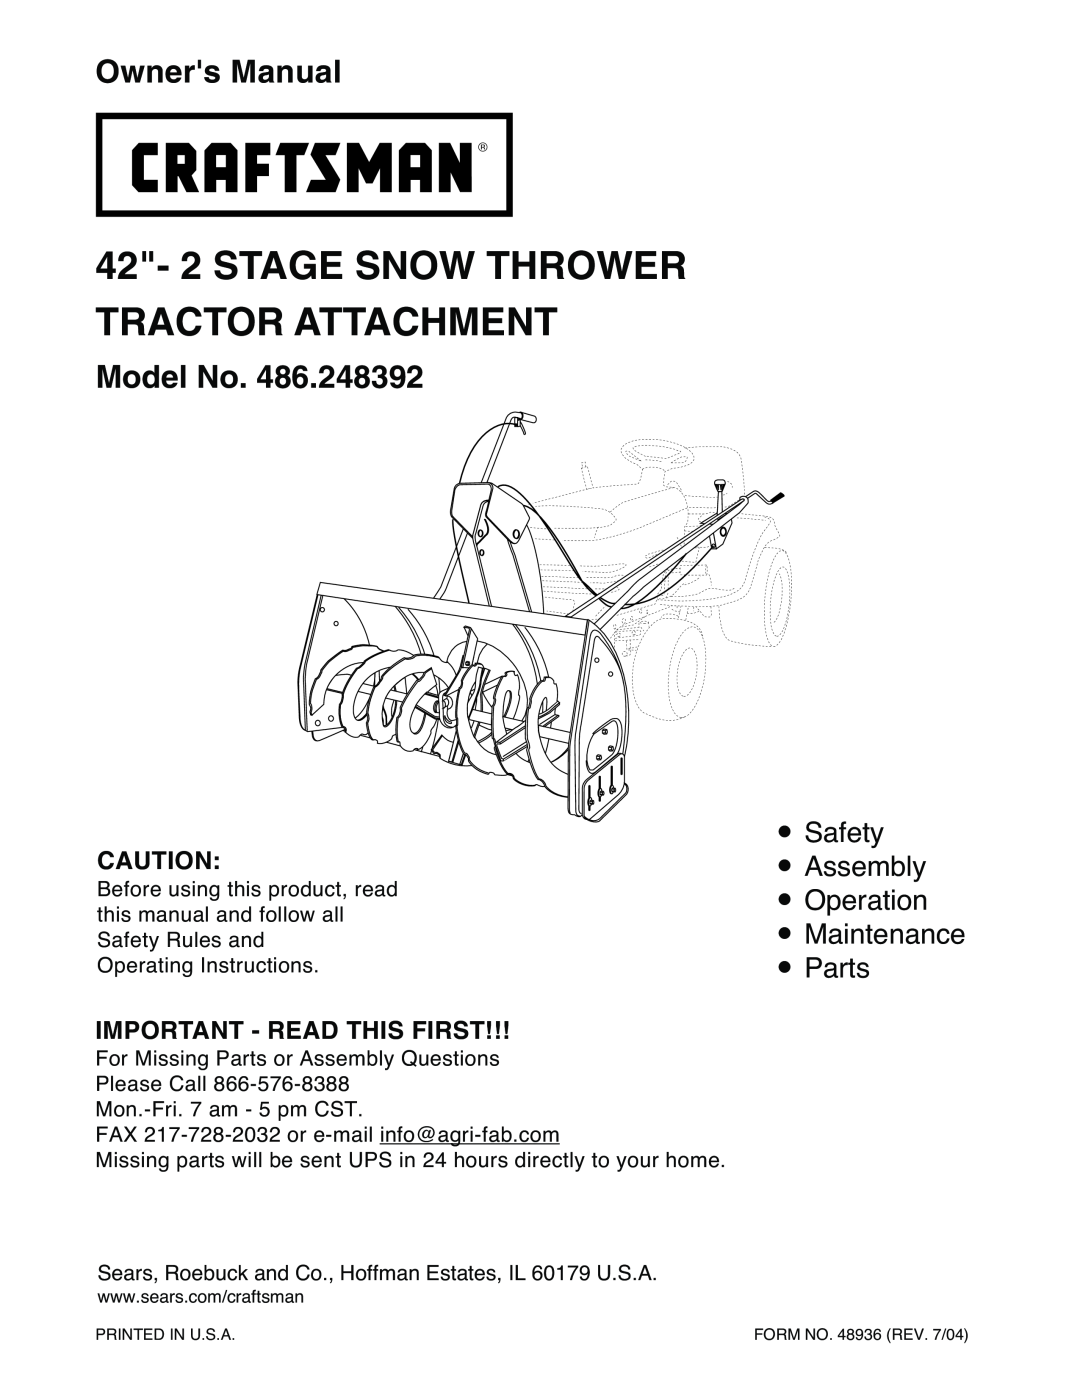 Sears 486.248392 owner manual Model No, Important - Read This First, 42- 2 STAGE SNOW THROWER TRACTOR ATTACHMENT 